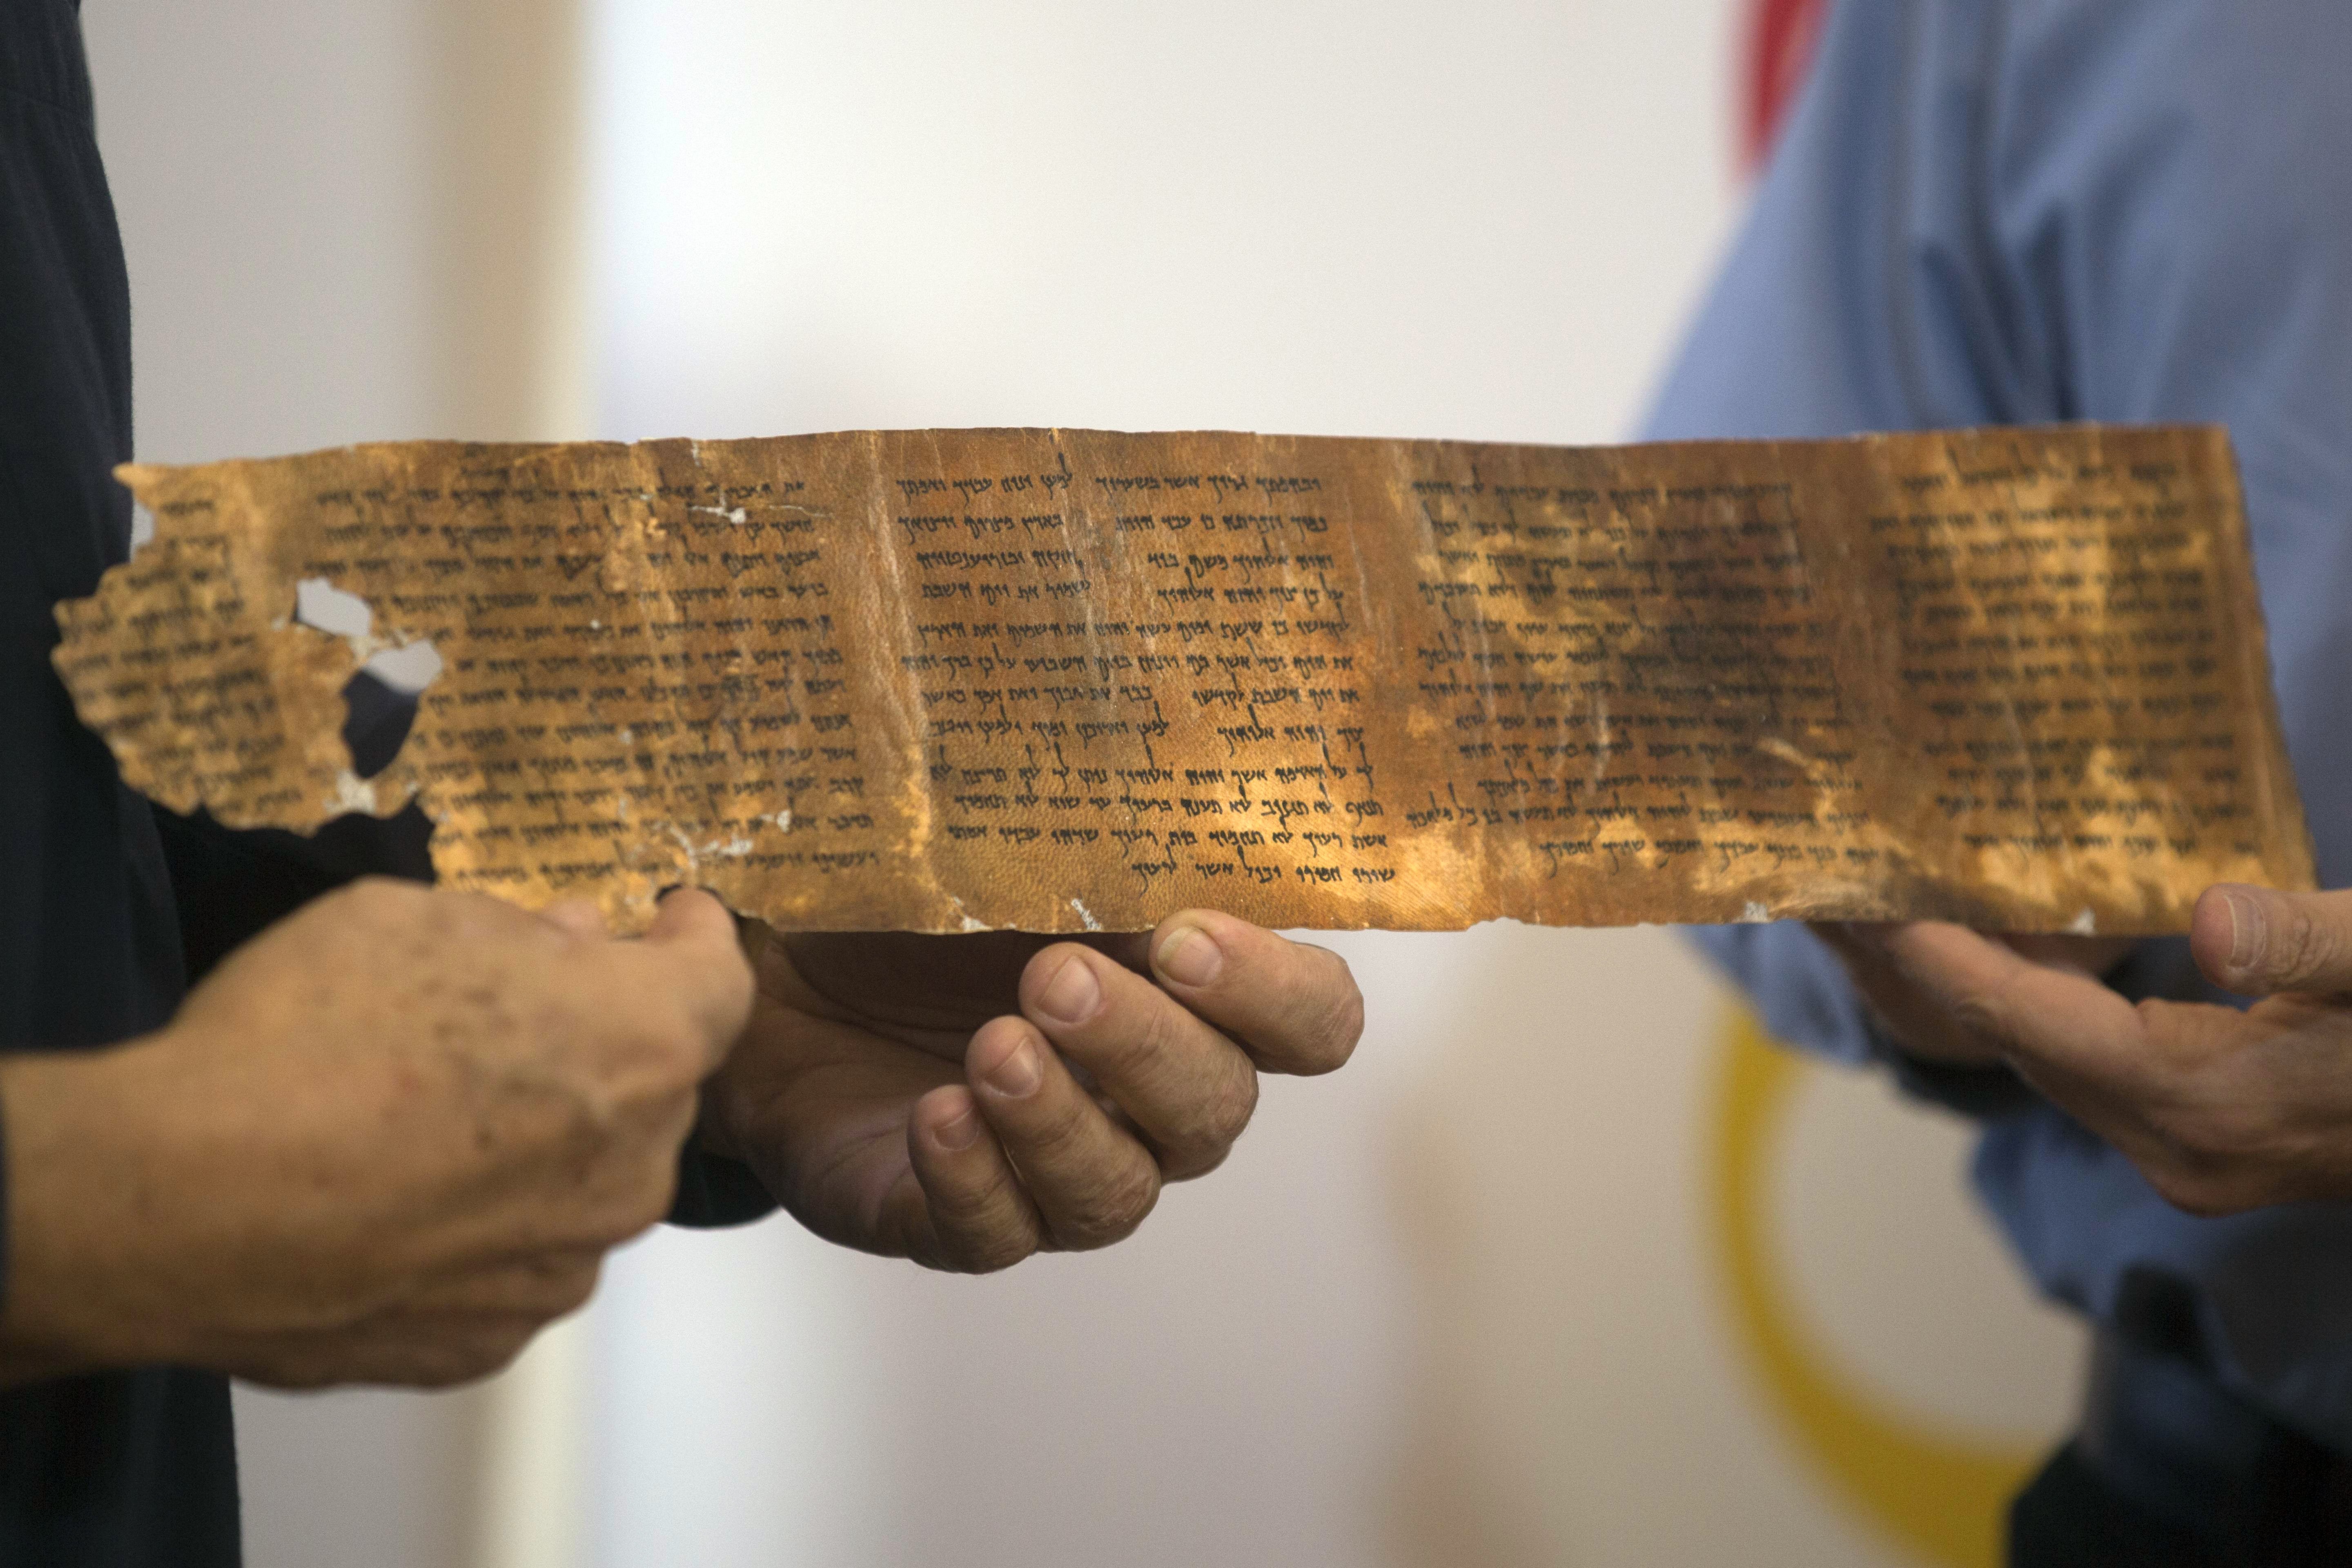 Keep scrolling: Researchers hold a replica of one of the seven ancient biblical manuscripts found in a cave at Qumran near the Dead Sea